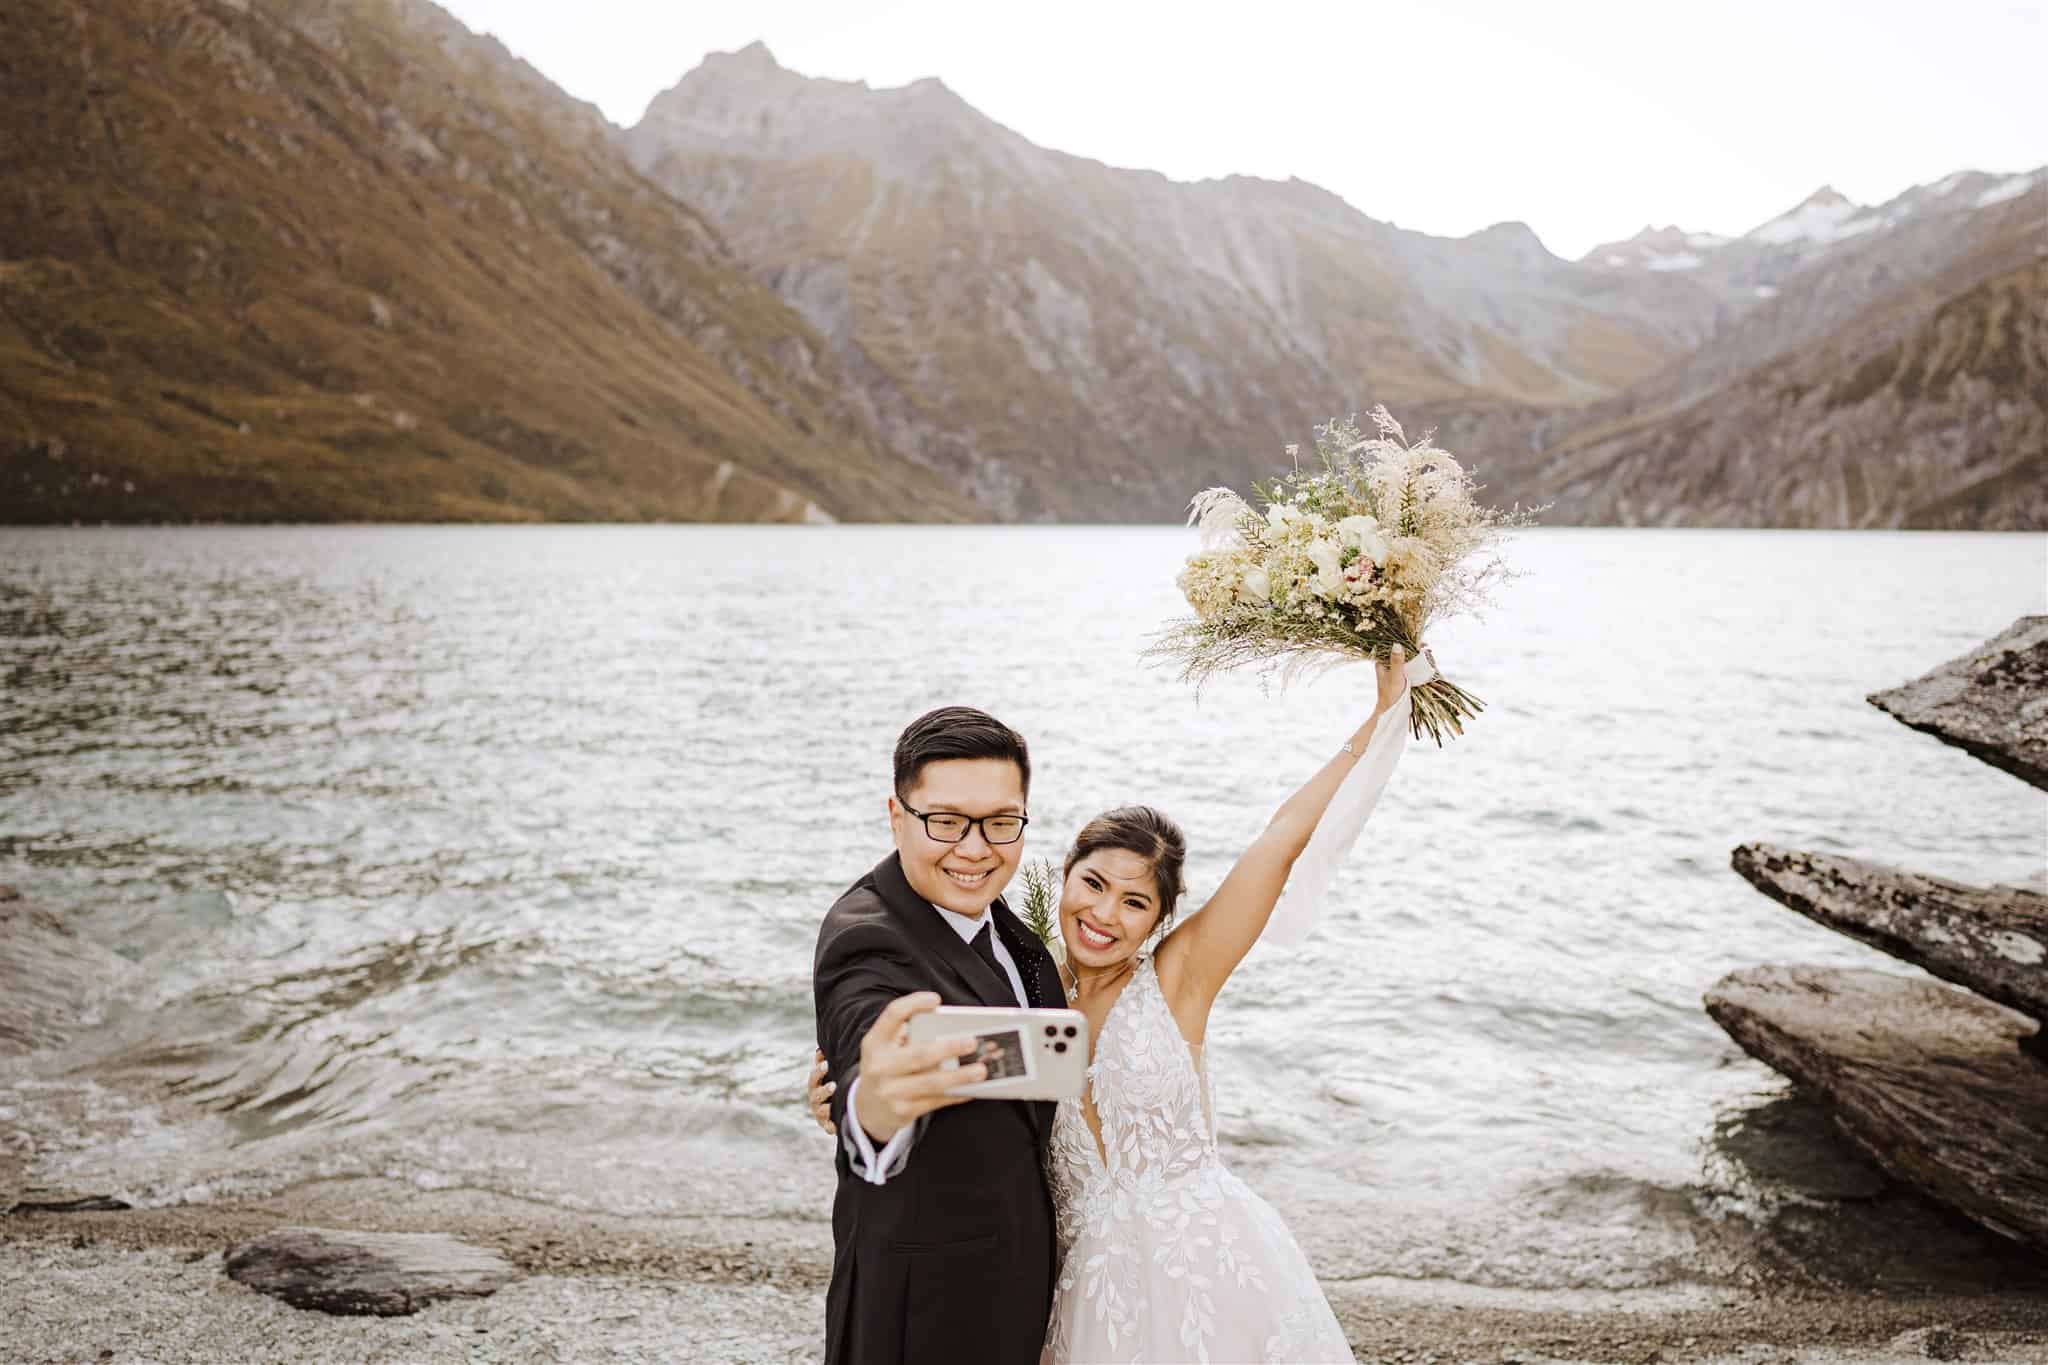 Wedding ceremony ideas for your Queenstown or Wanaka wedding